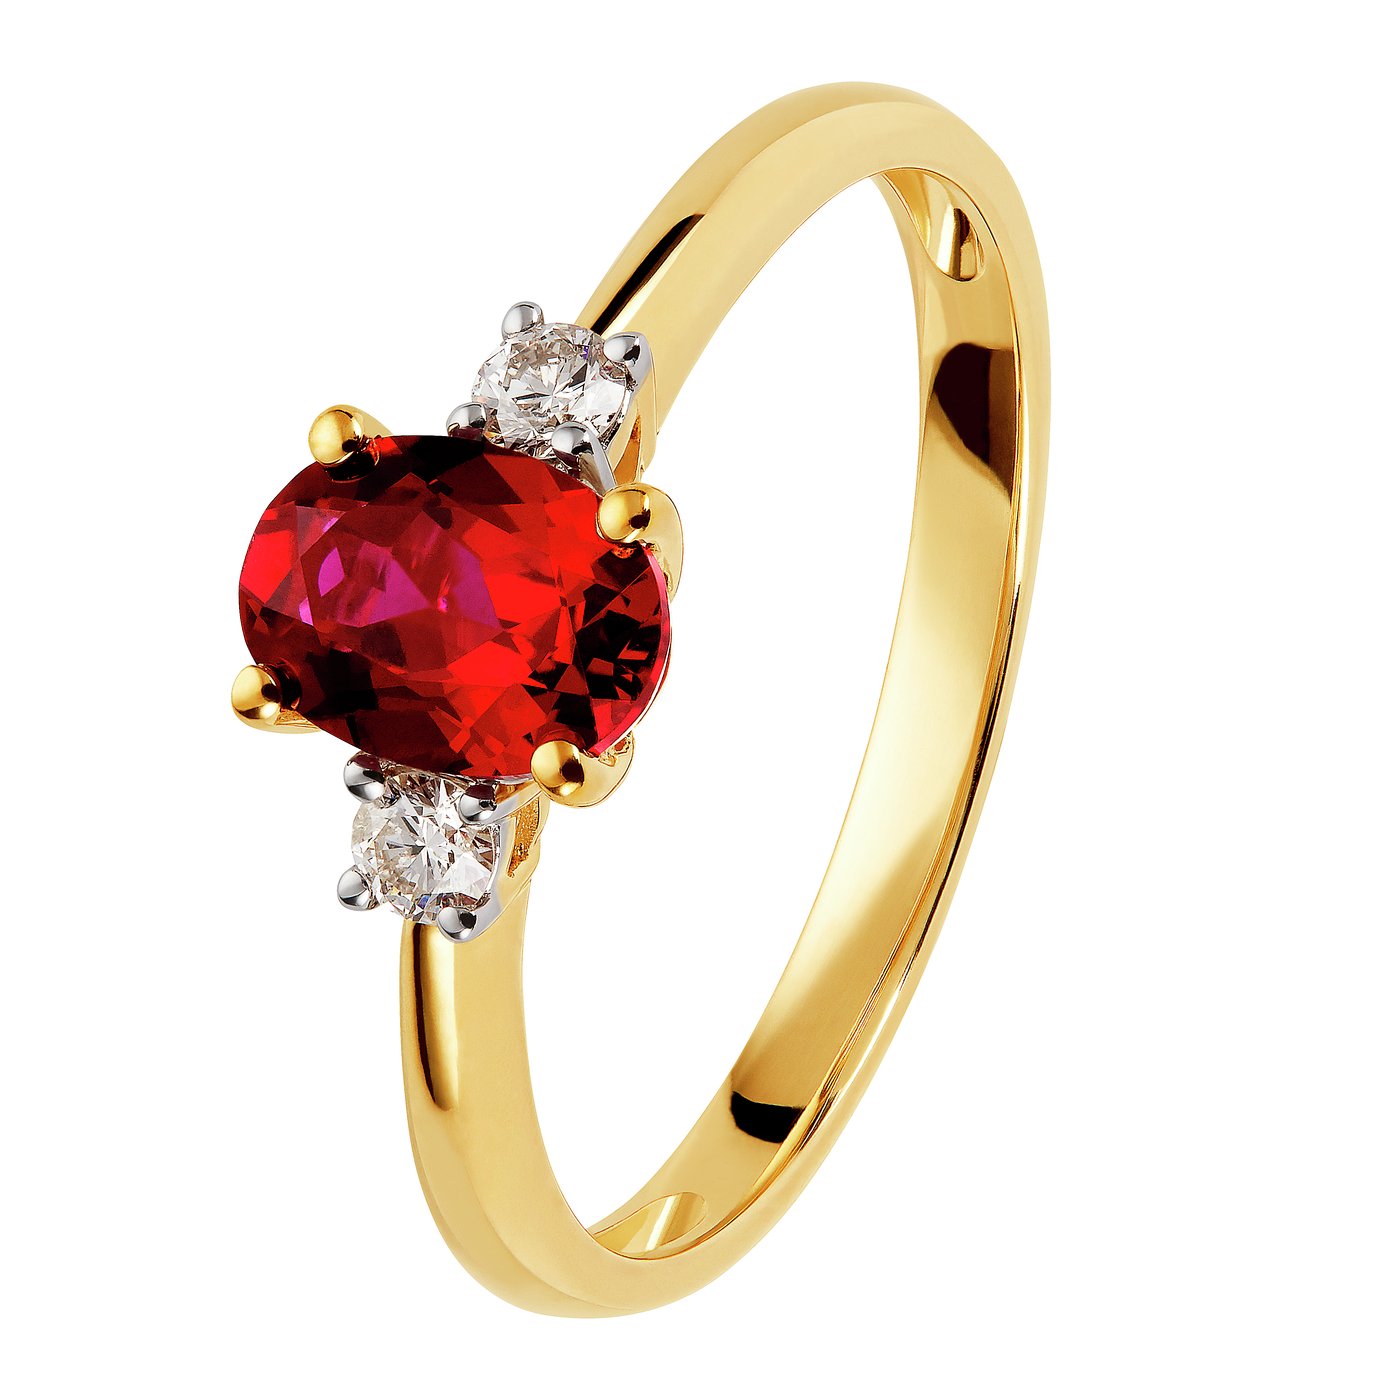 Revere 9ct Gold 0.10ct Diamond and Ruby Engagement Ring - P